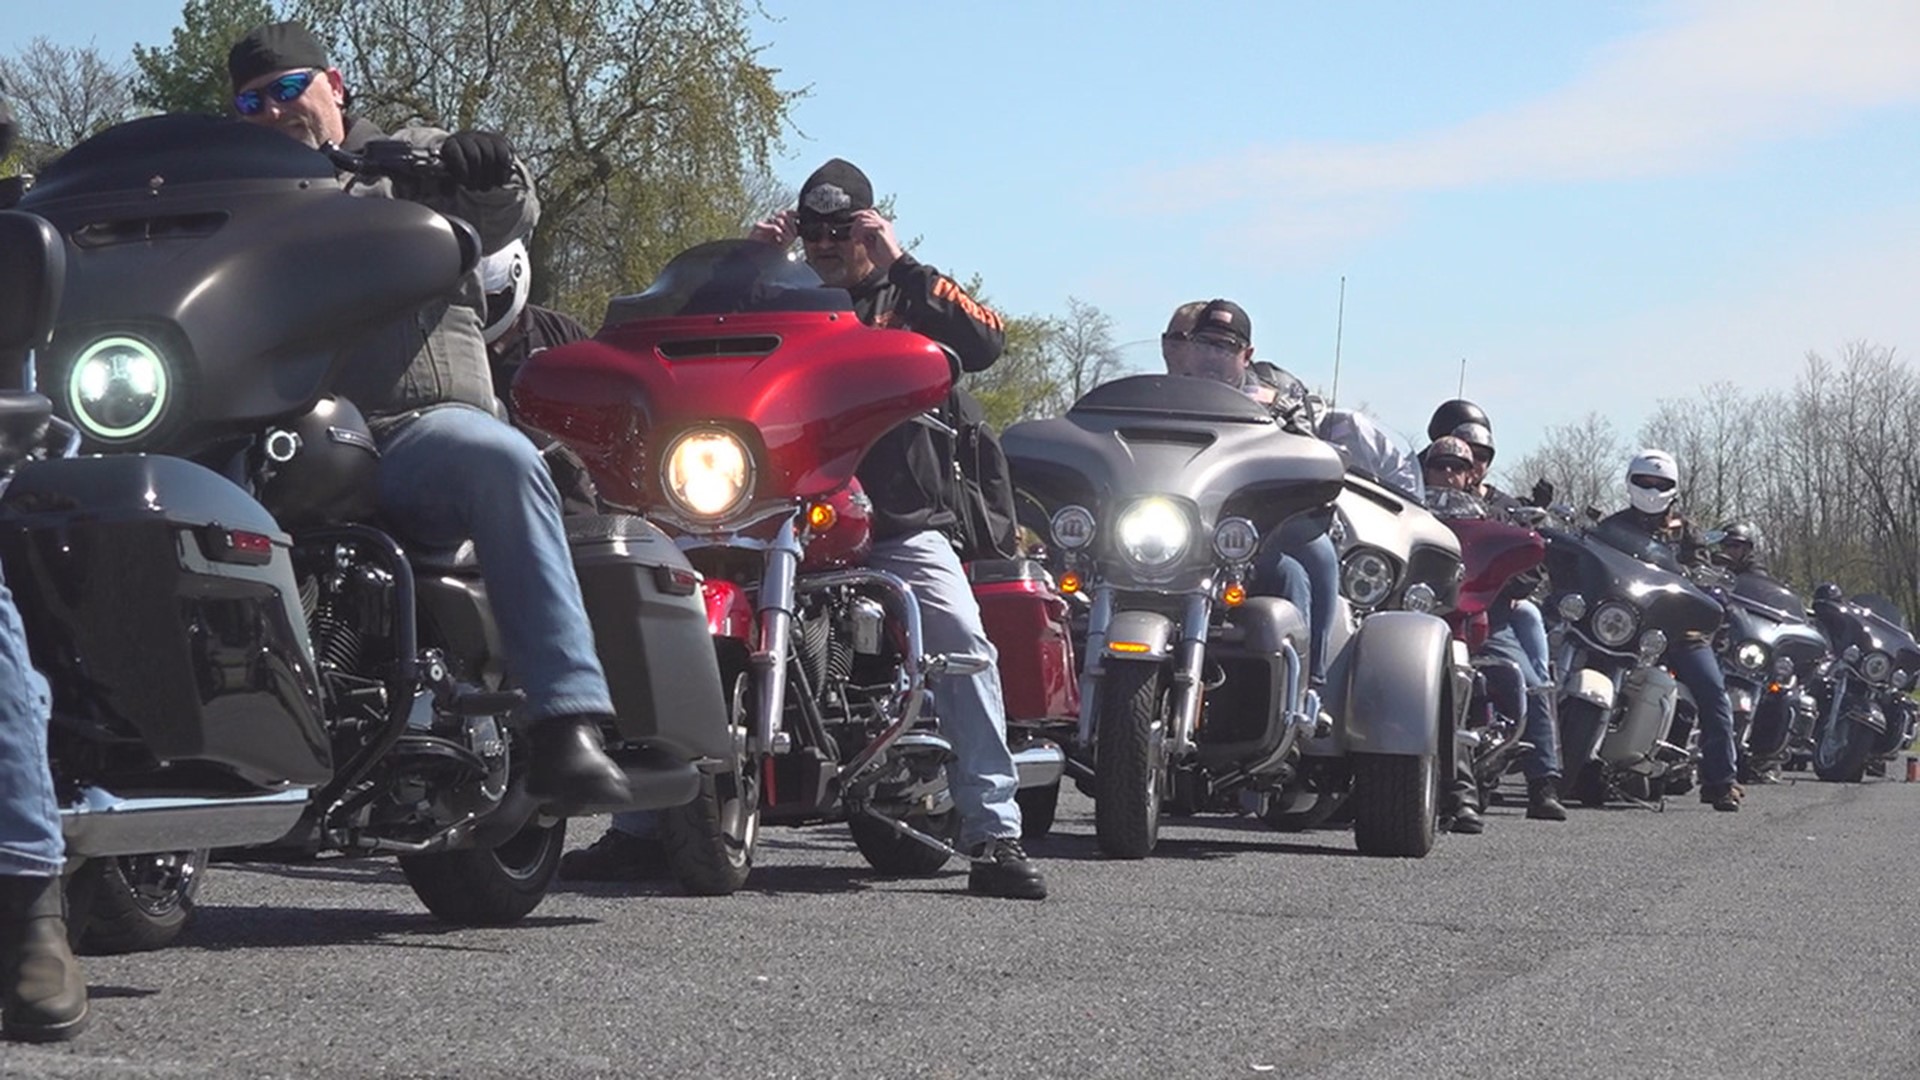 Around 200 people took part in the charity ride to raise money for a Harrisburg nonprofit working to support veterans struggling with homelessness.